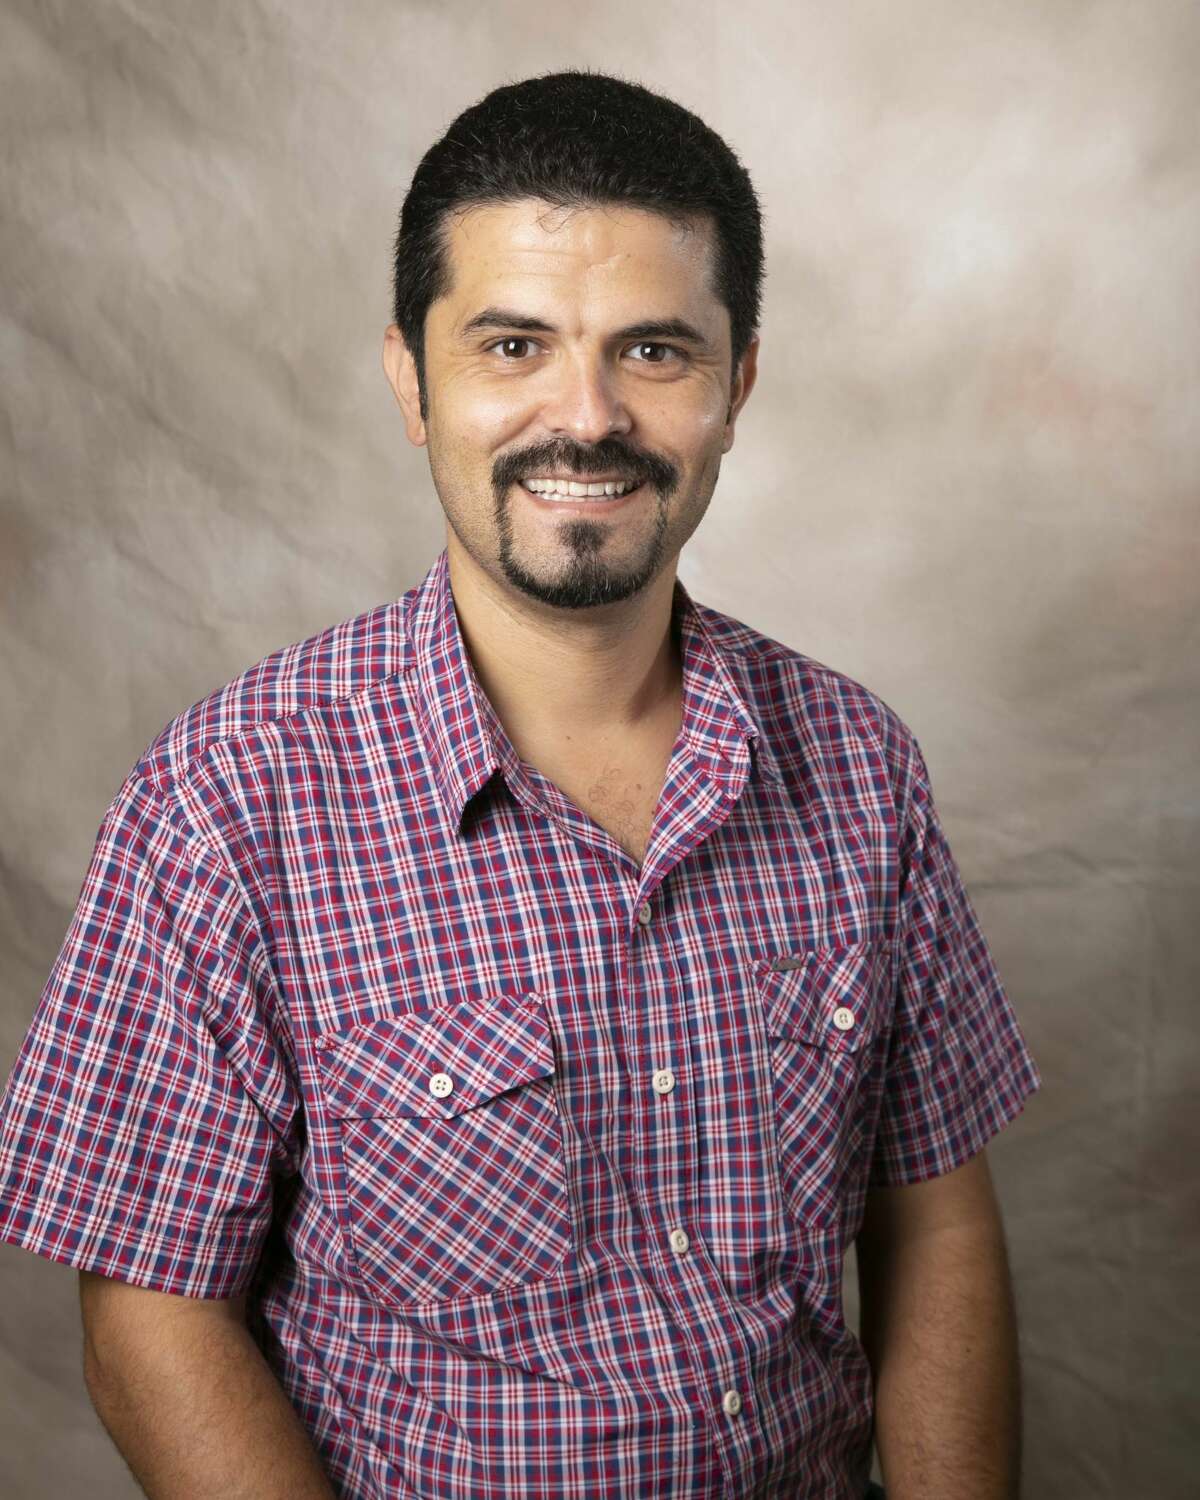 Ahmet Gokhan Unlu will be one of 28 high school science teachers selected by the SETI Institute as a 2020 NASA Airborne Astronomy Ambassador.